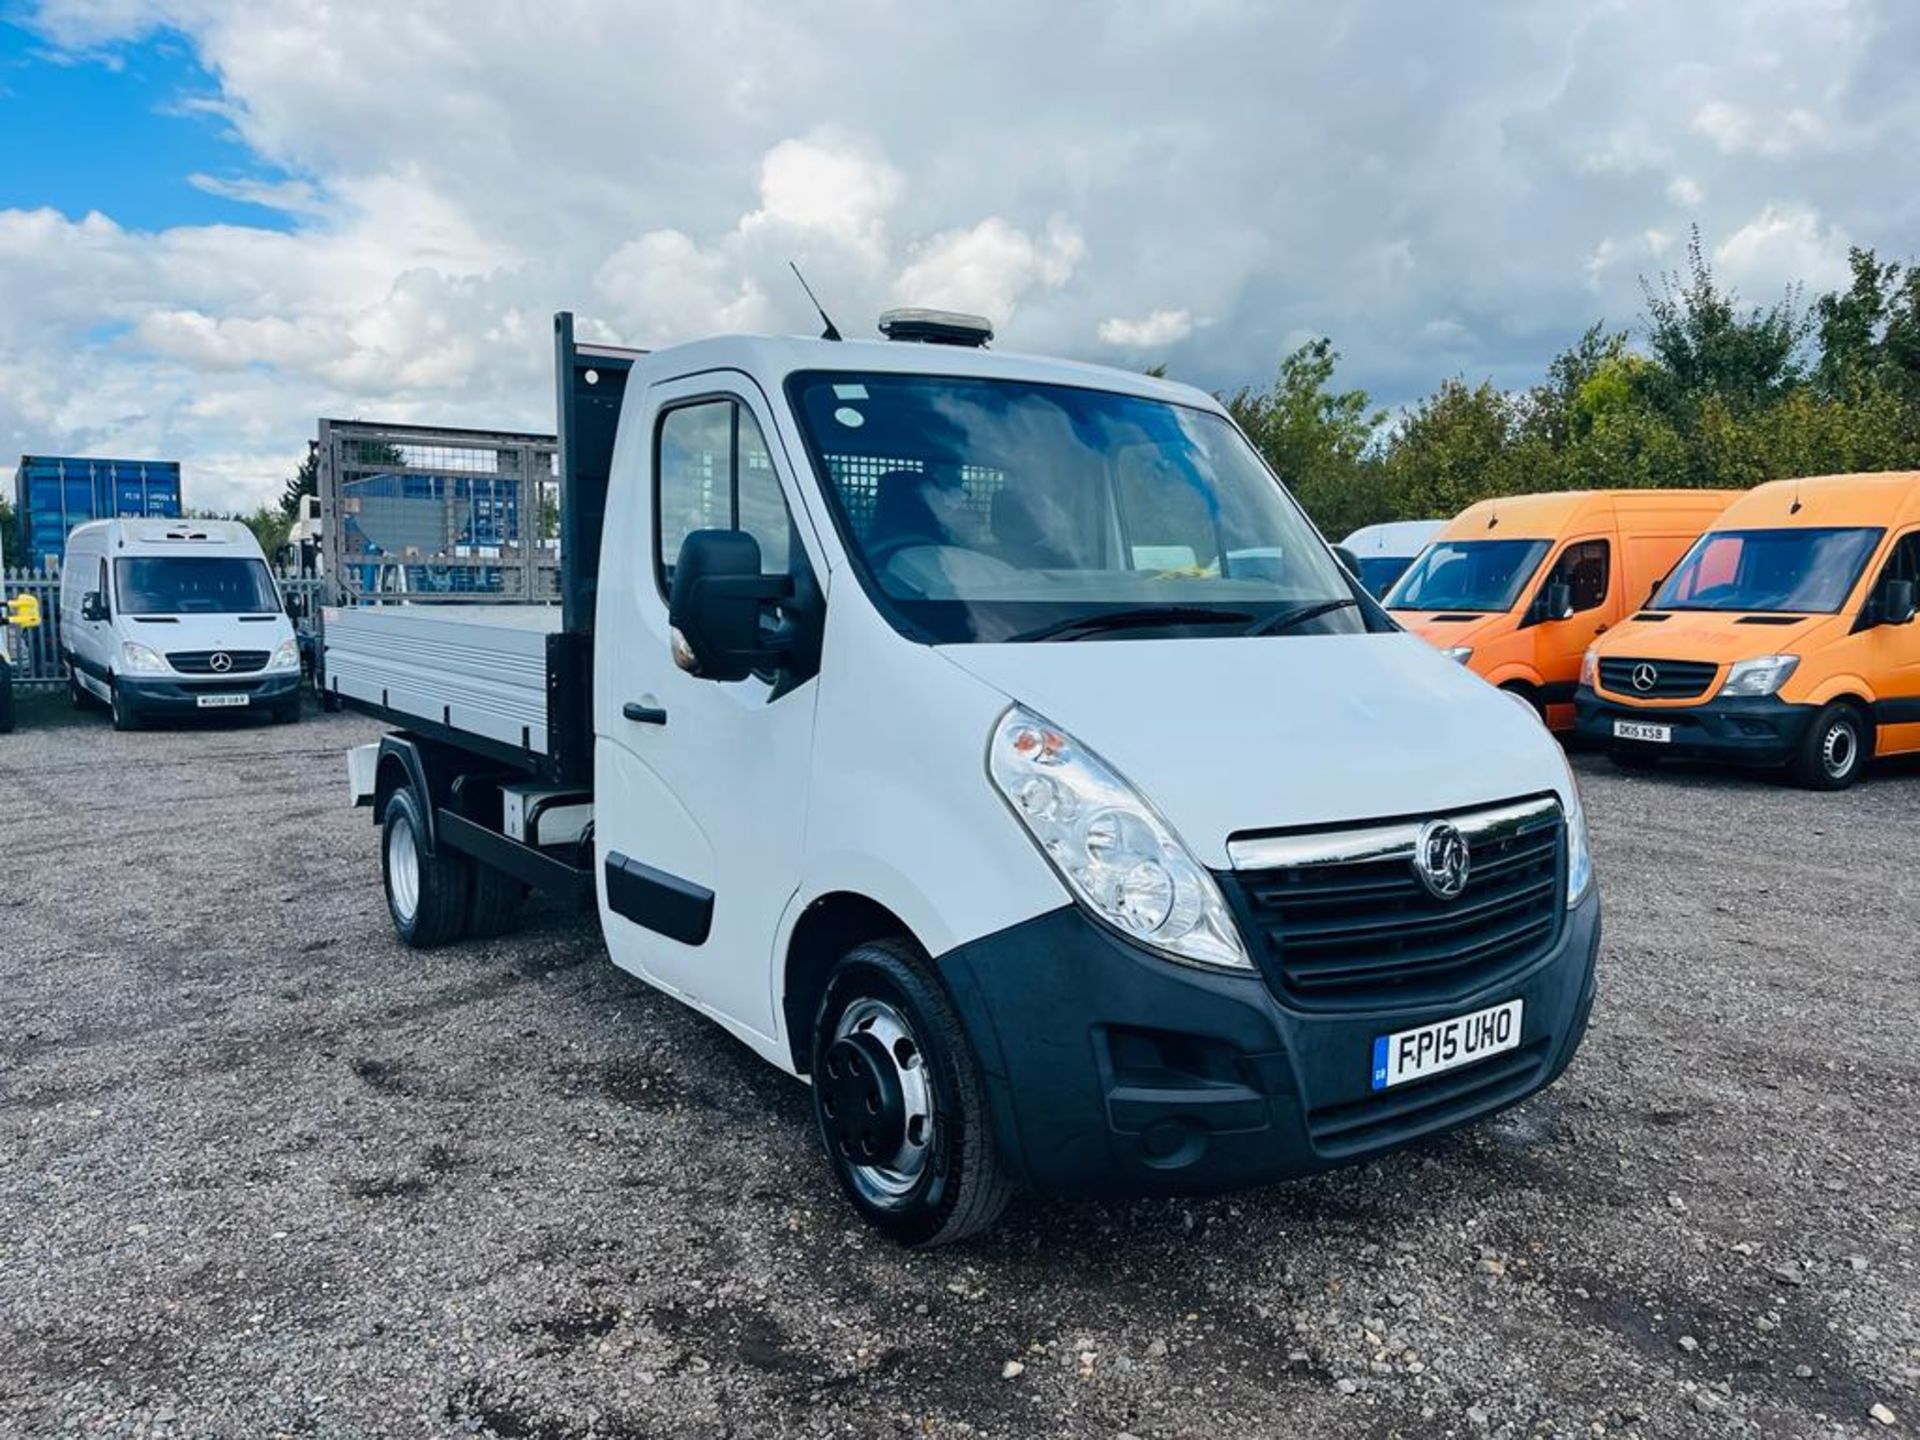 ** ON SALE ** Vauxhall Movano 2.3 CDTI RWD TRW R3500 2015 '15 Reg' Tipper - Only 110,779 Miles - Image 2 of 29